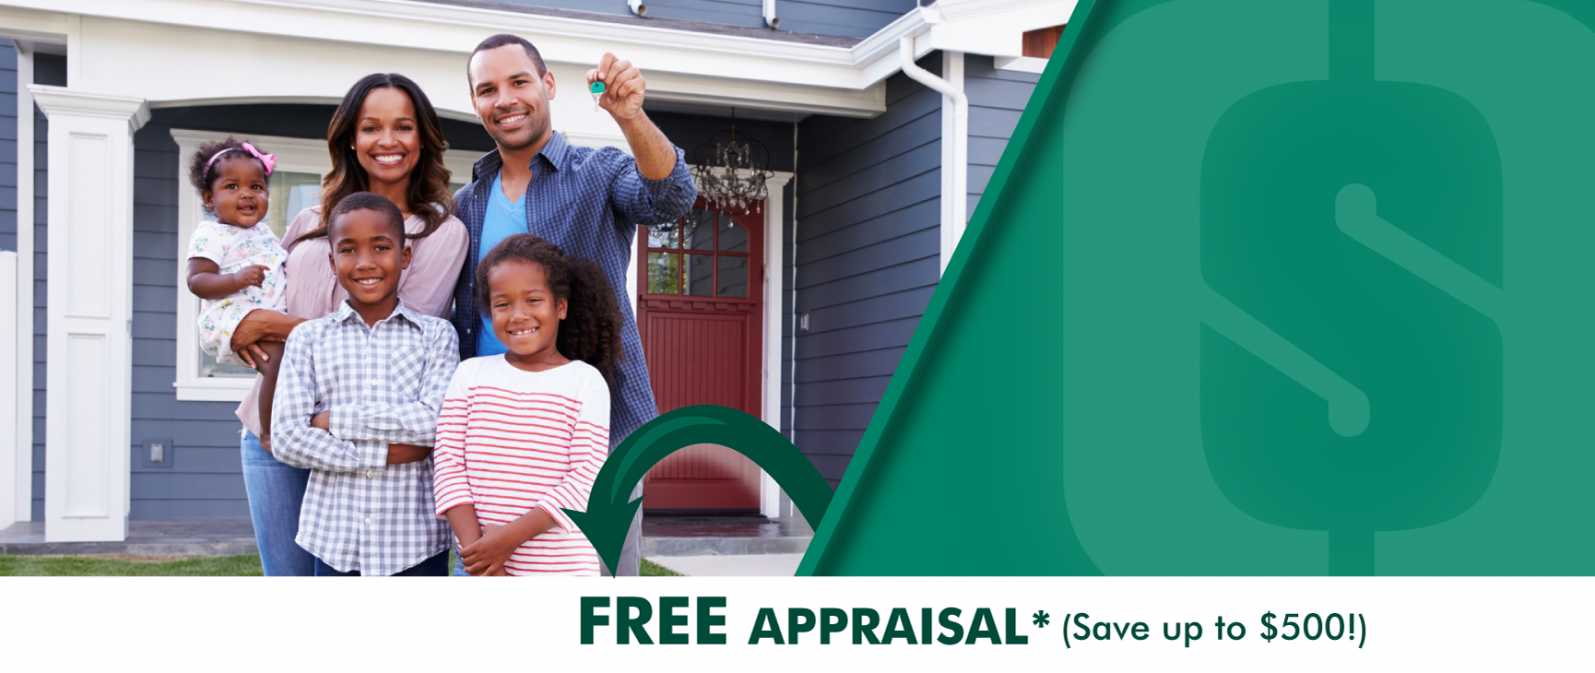 FREE Appraisal* (Save up to $500)